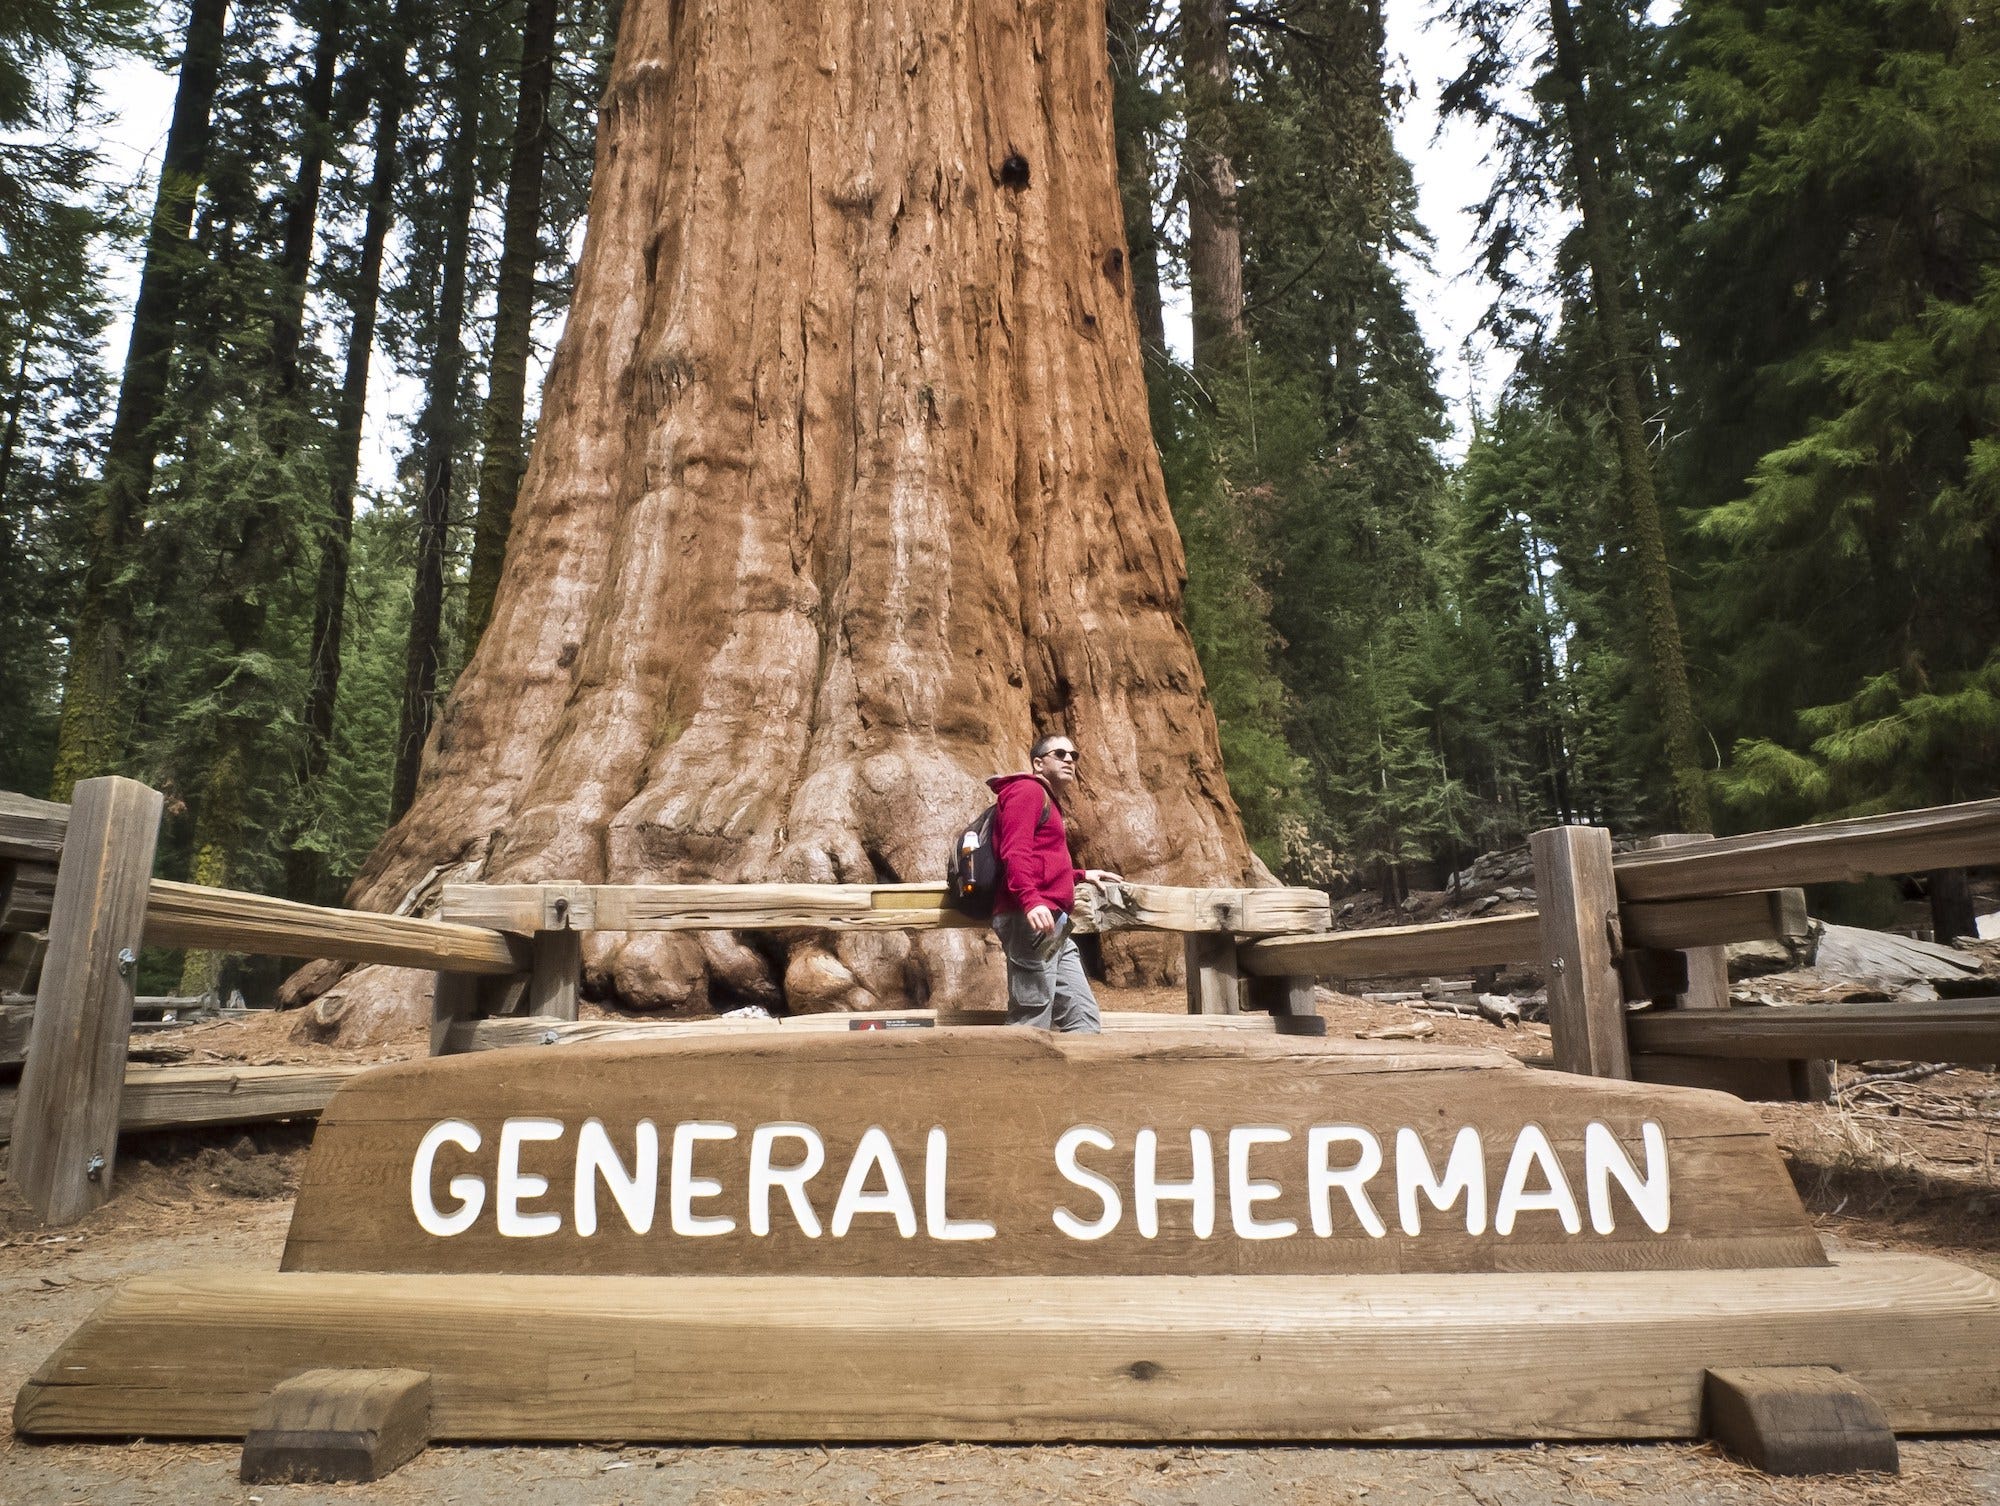 A sign reading 'GENERAL SHERMAN' is in front of the tree's base, which continues out of frame. A man wearing hiking gear, a backpack and sunglasses is in front of the tree